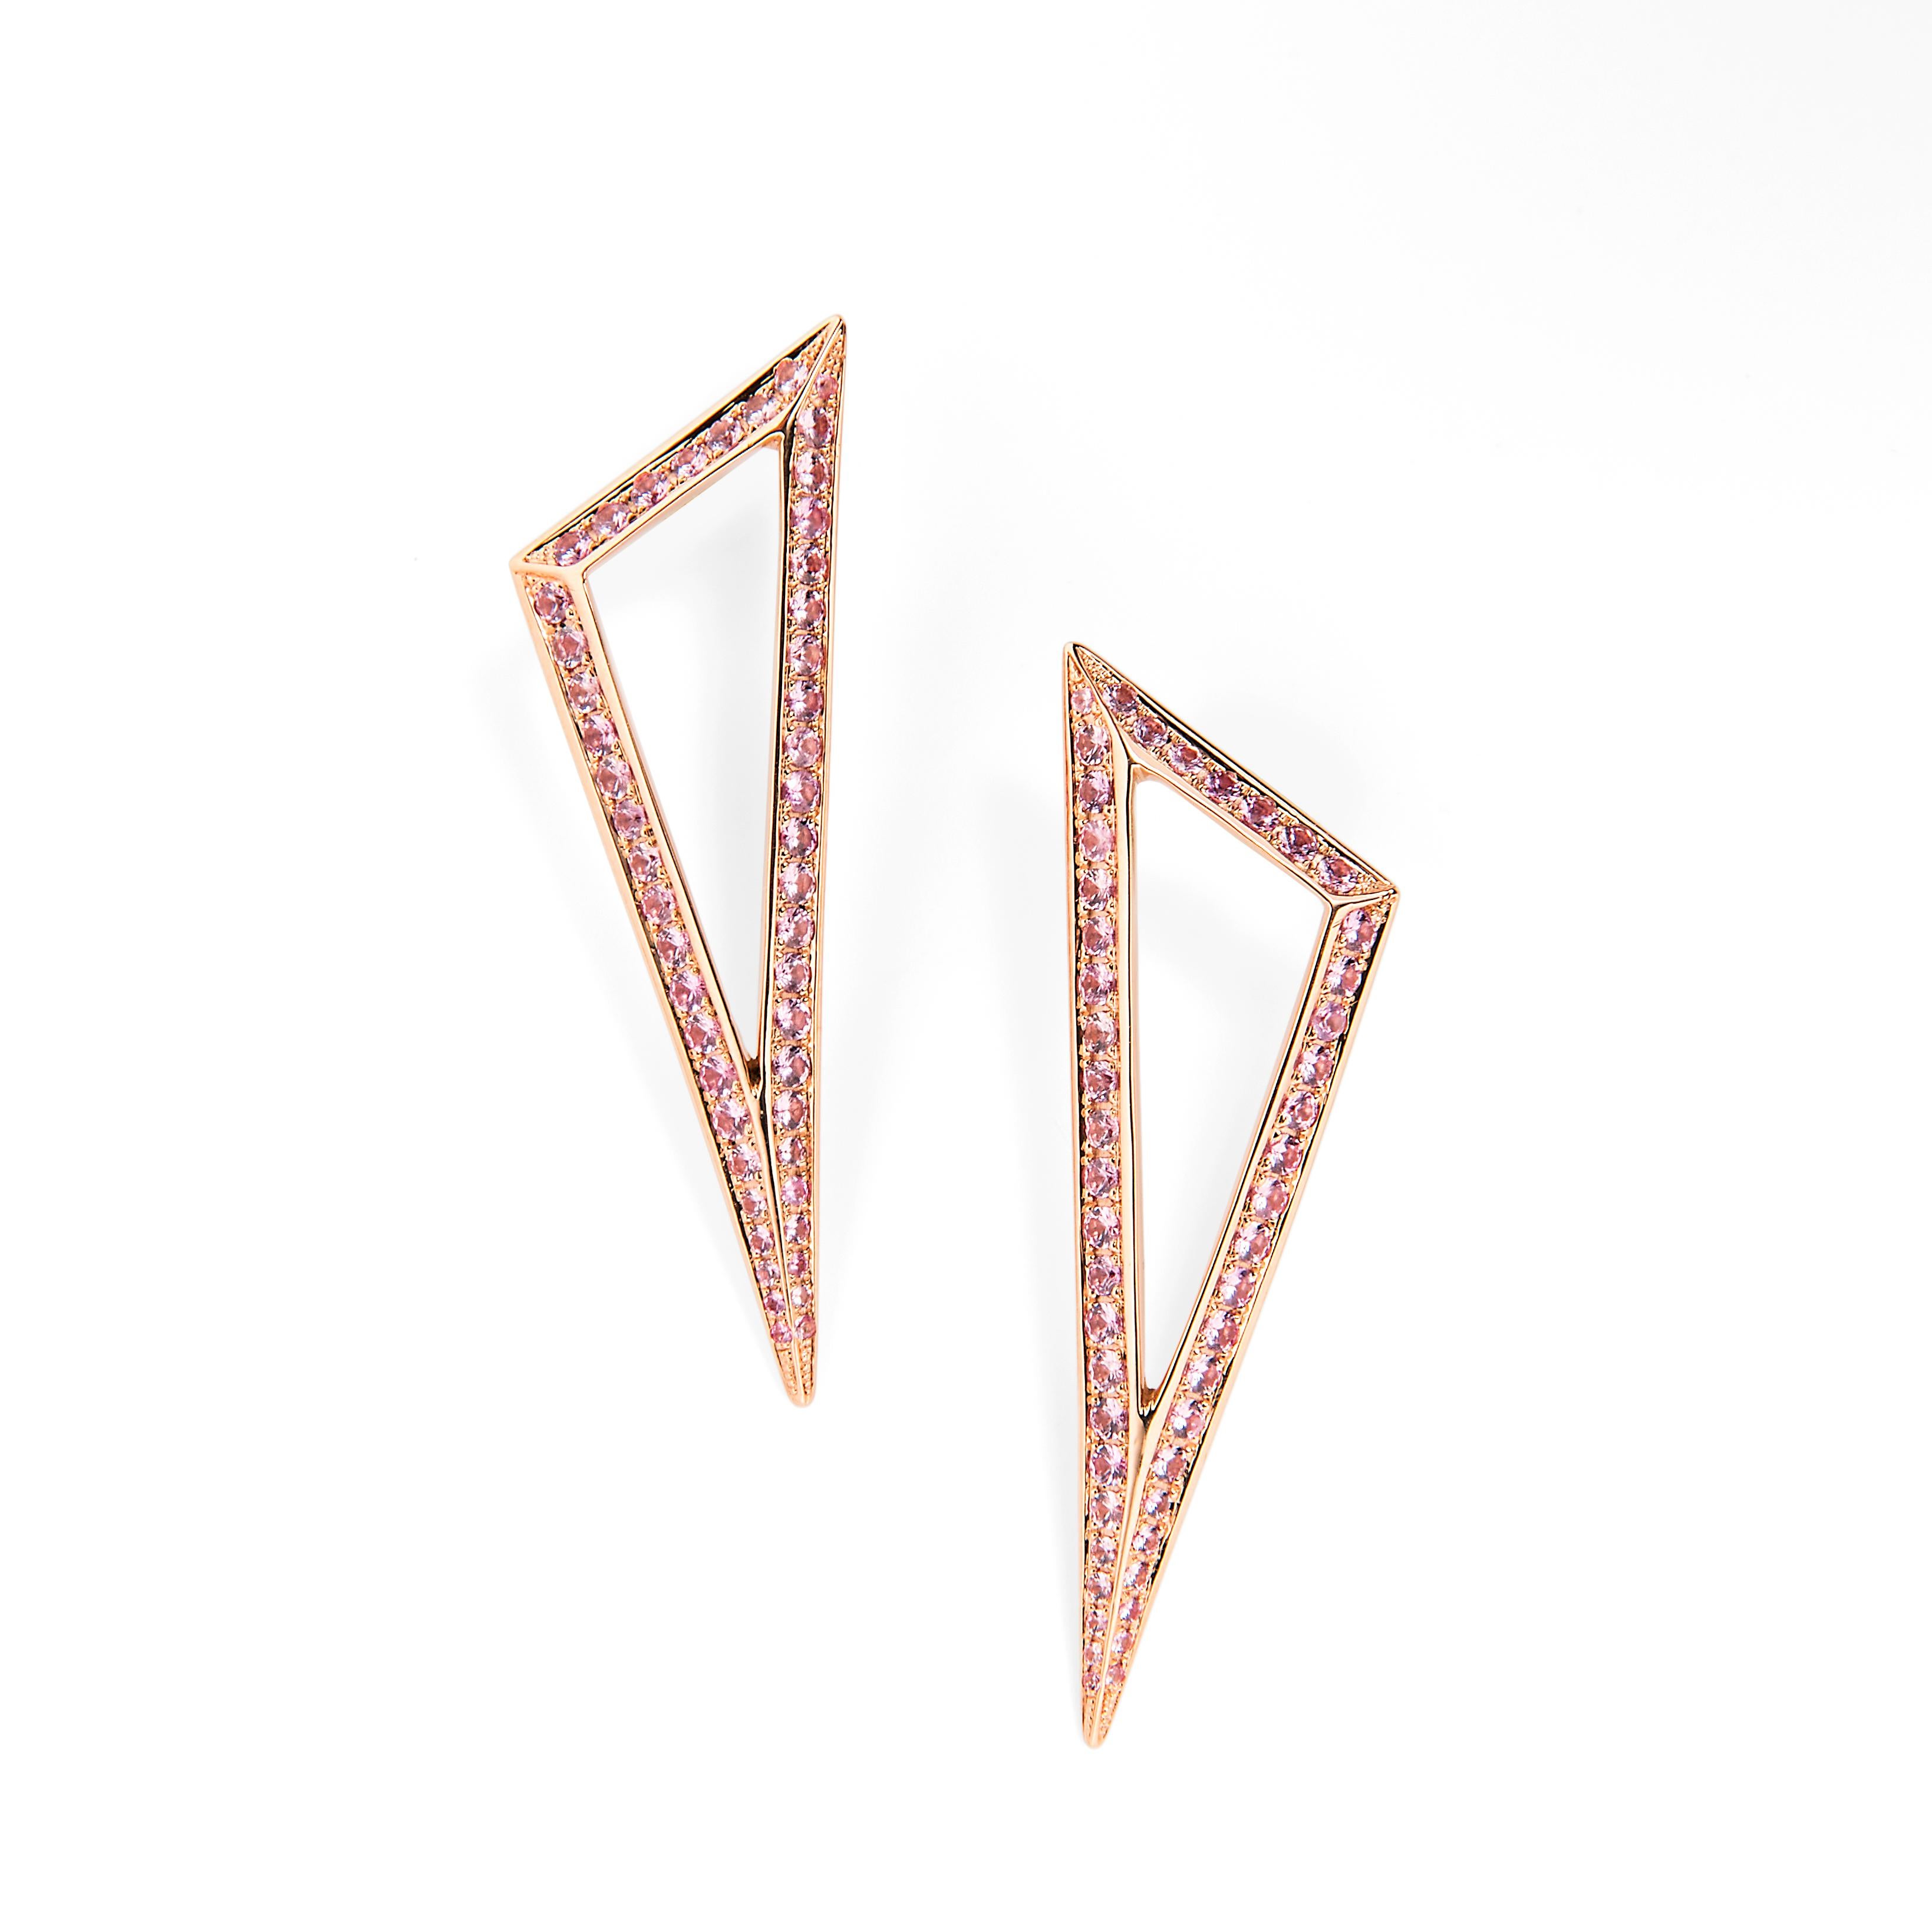 Keep your look on point with these triangle form earrings. The refined shape sparkles with elegant pink sapphires. 

18k Rose Gold
Pink sapphires TCW is 2.60
Friction post and back closure
Length is 2 inches and width is 0.65 inches